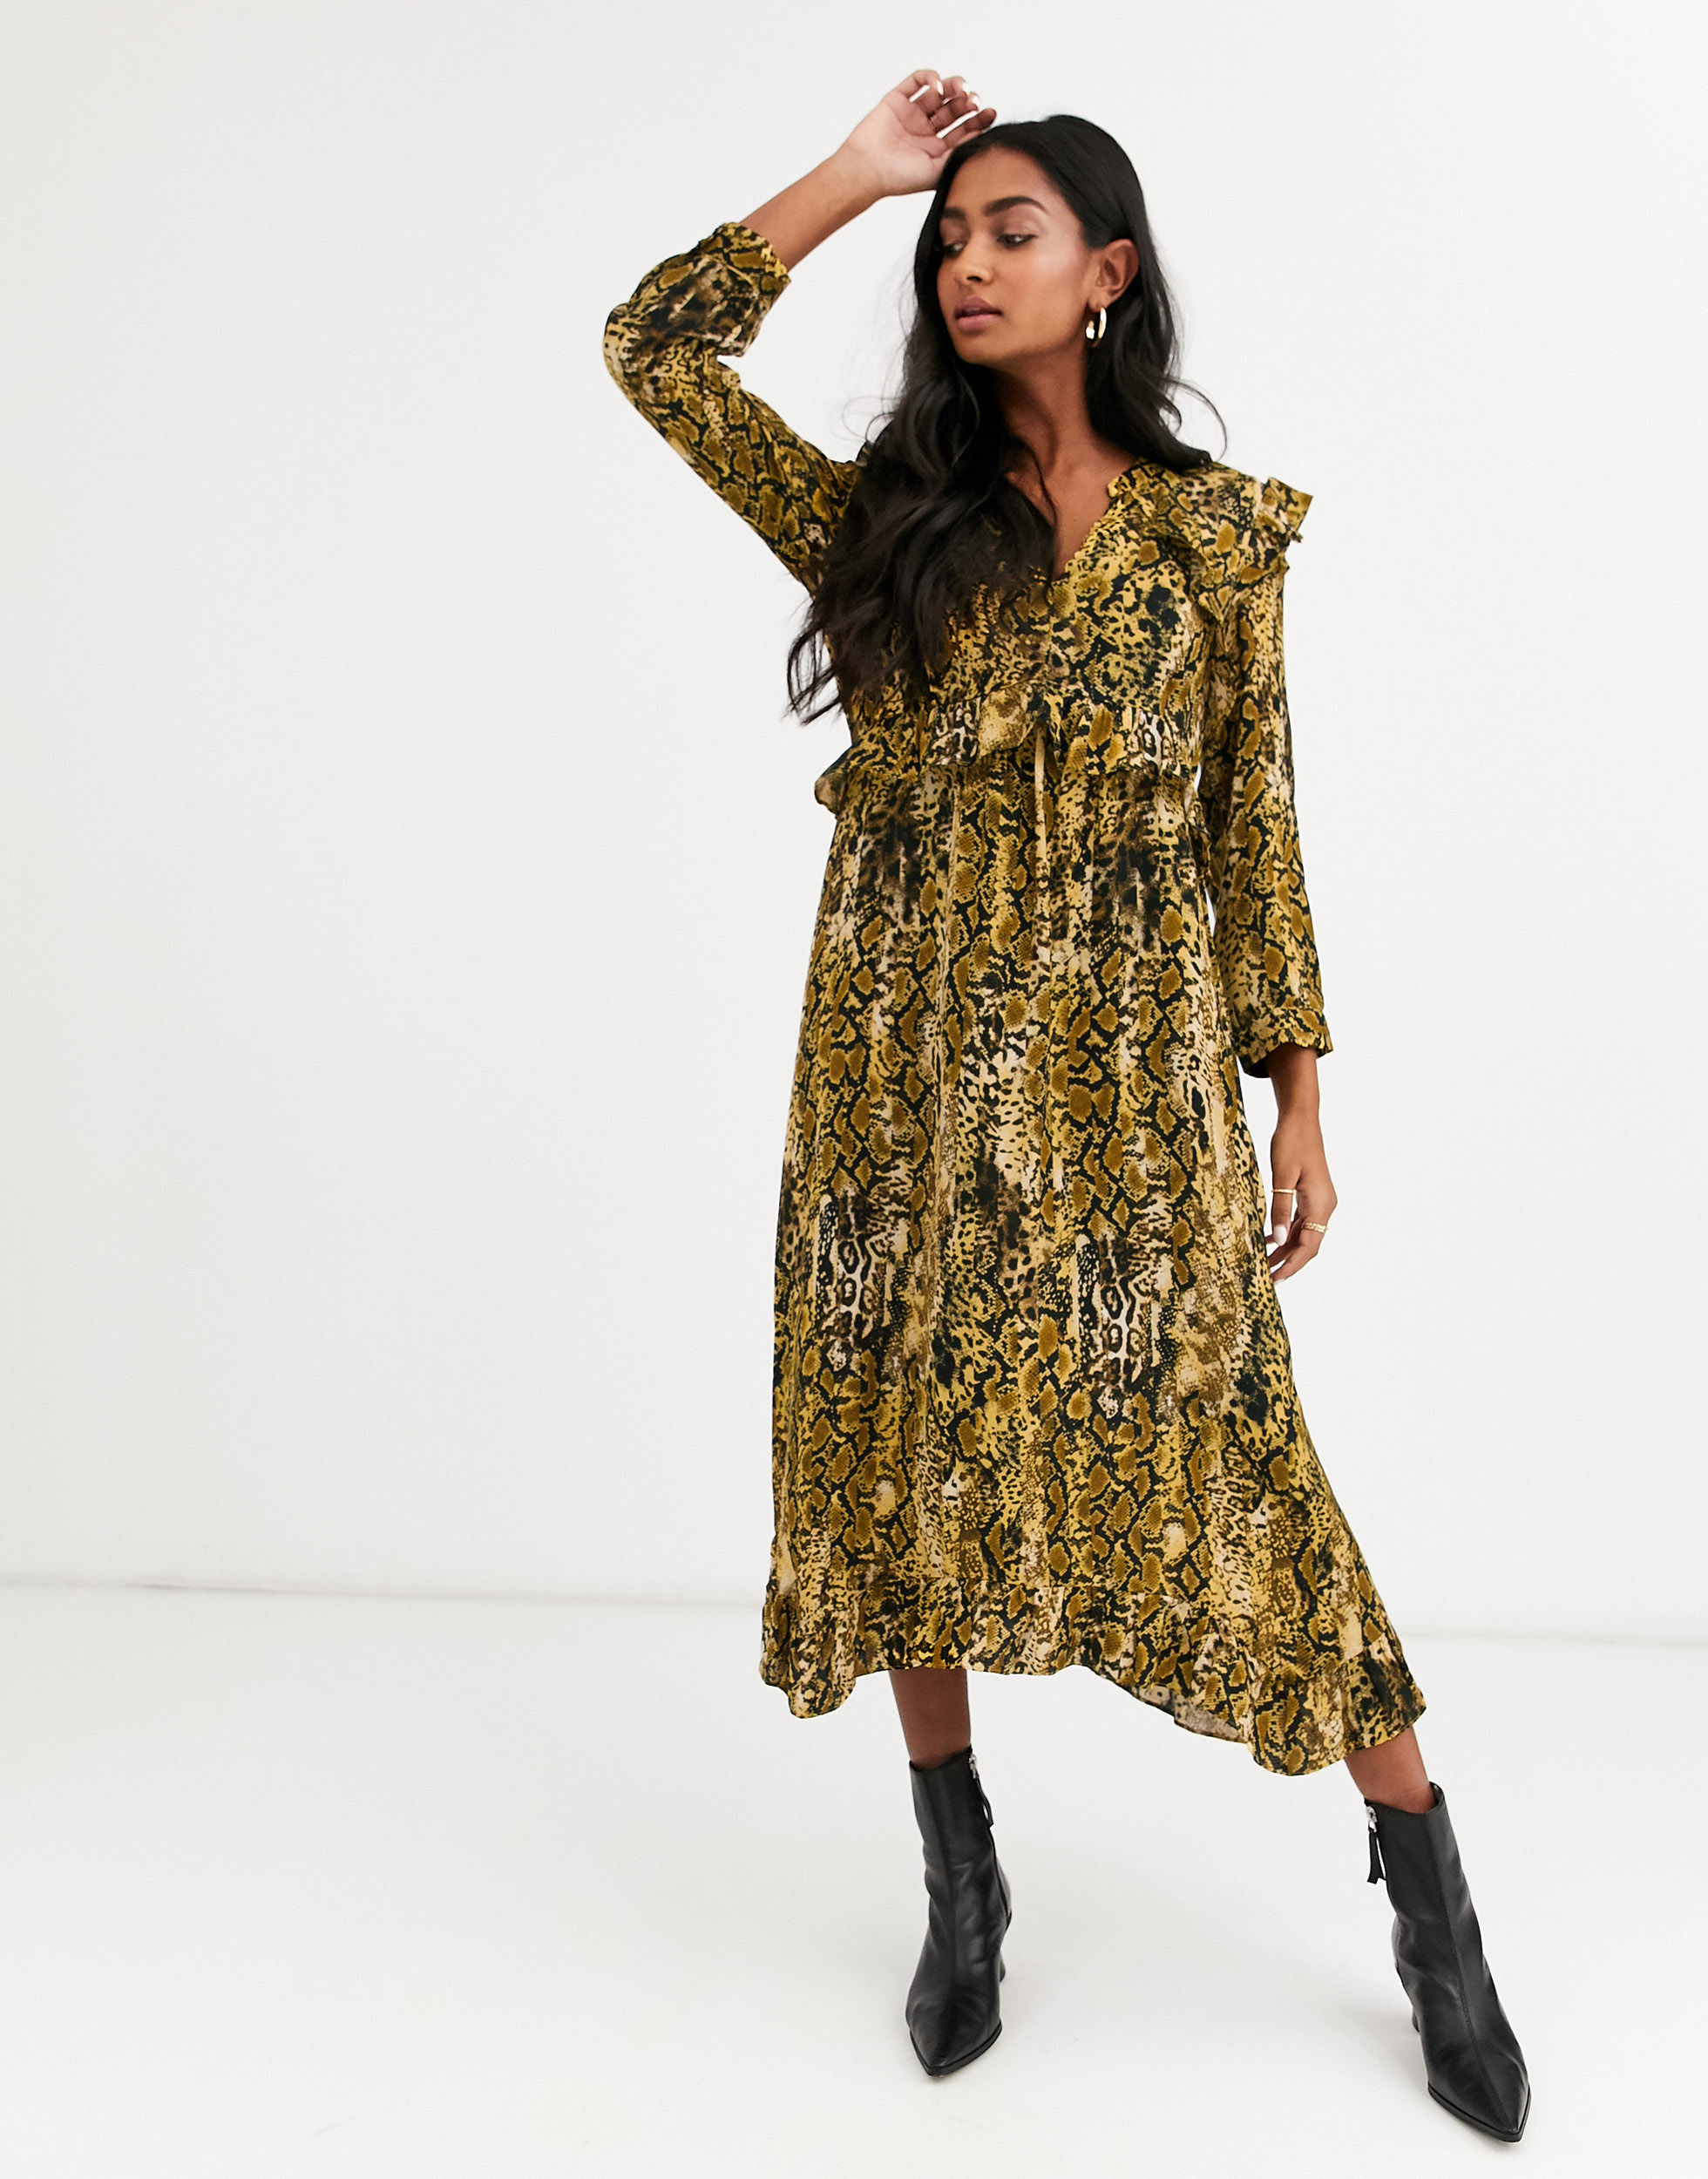 ASOS dresses for fashion fans that want high cost-per-wear value | Woman u0026  Home